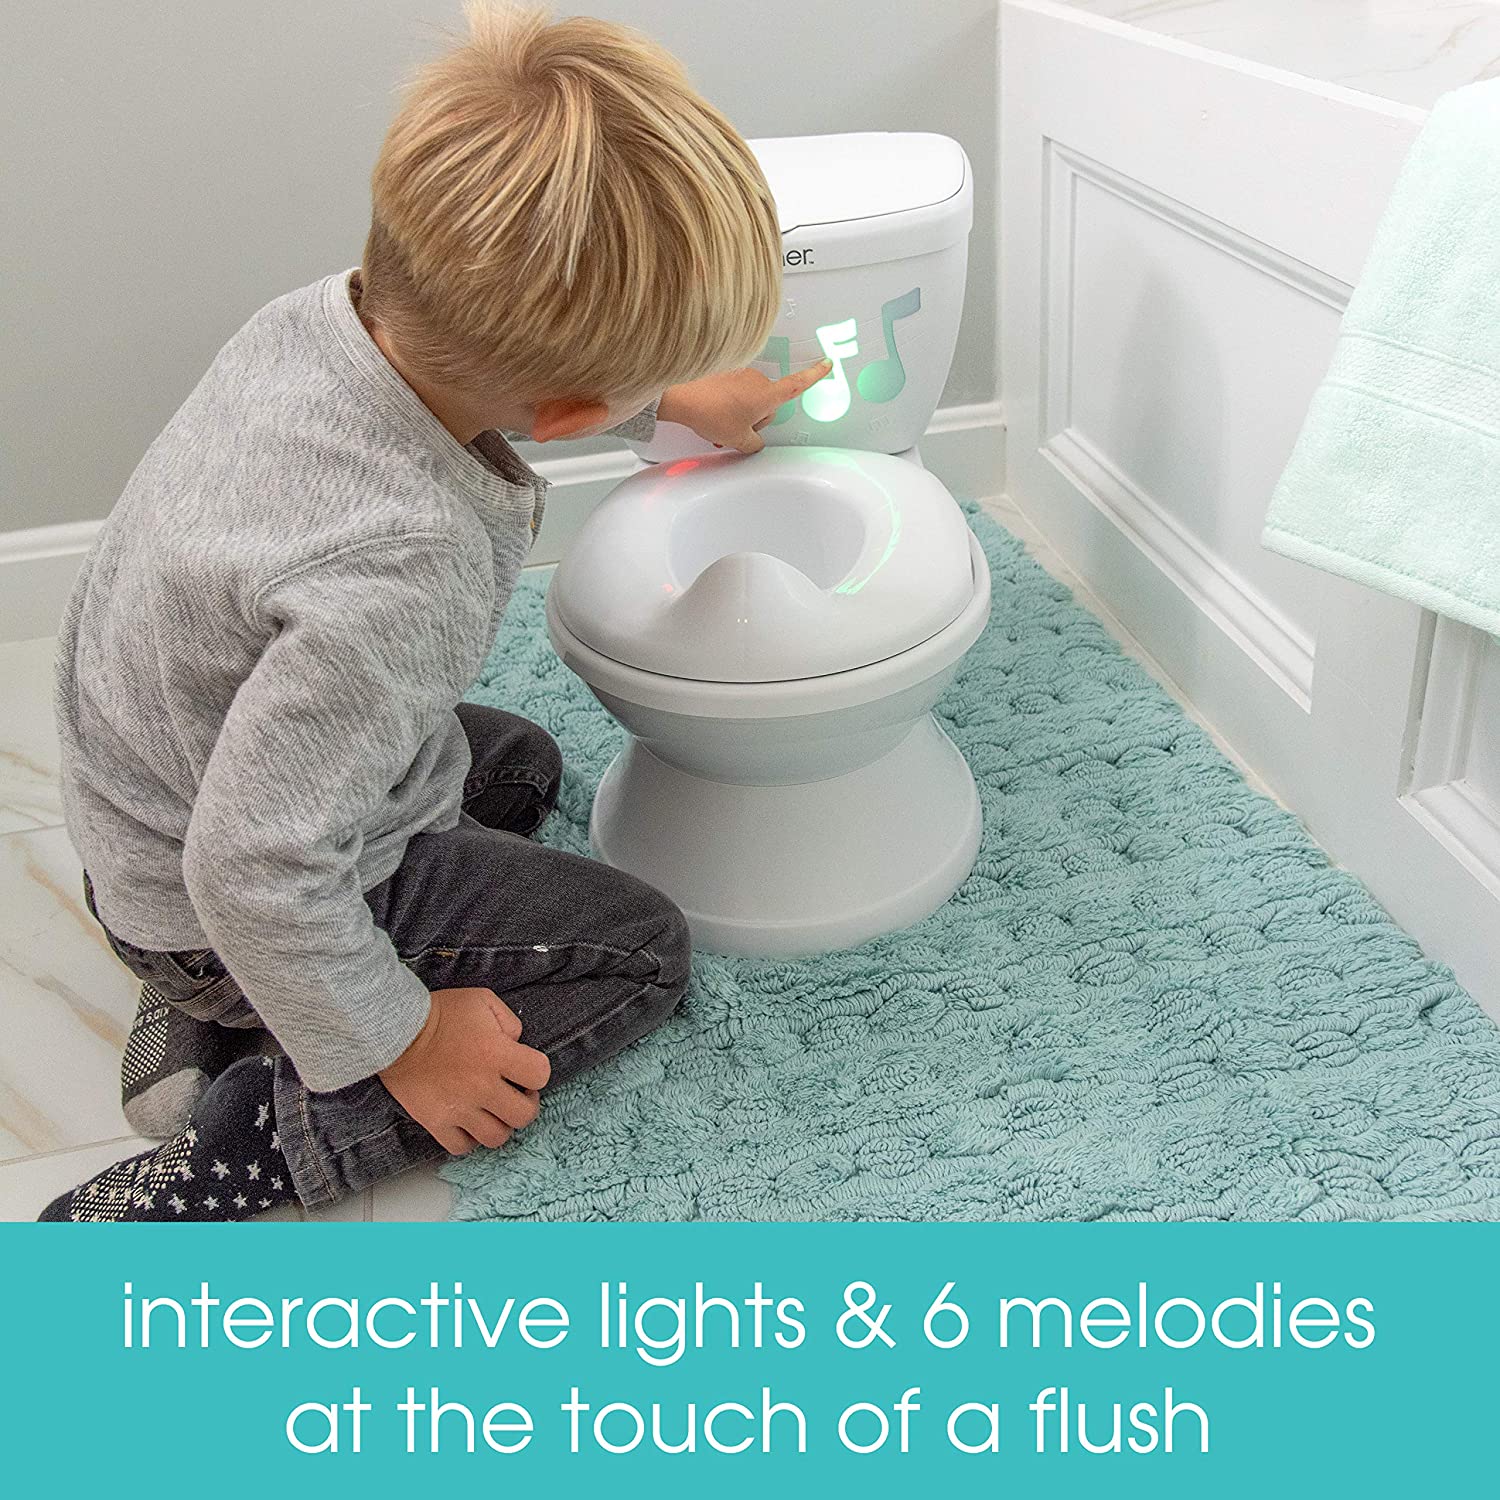 My Size Toddler Potty With Lights and Sounds - Little Kids Business